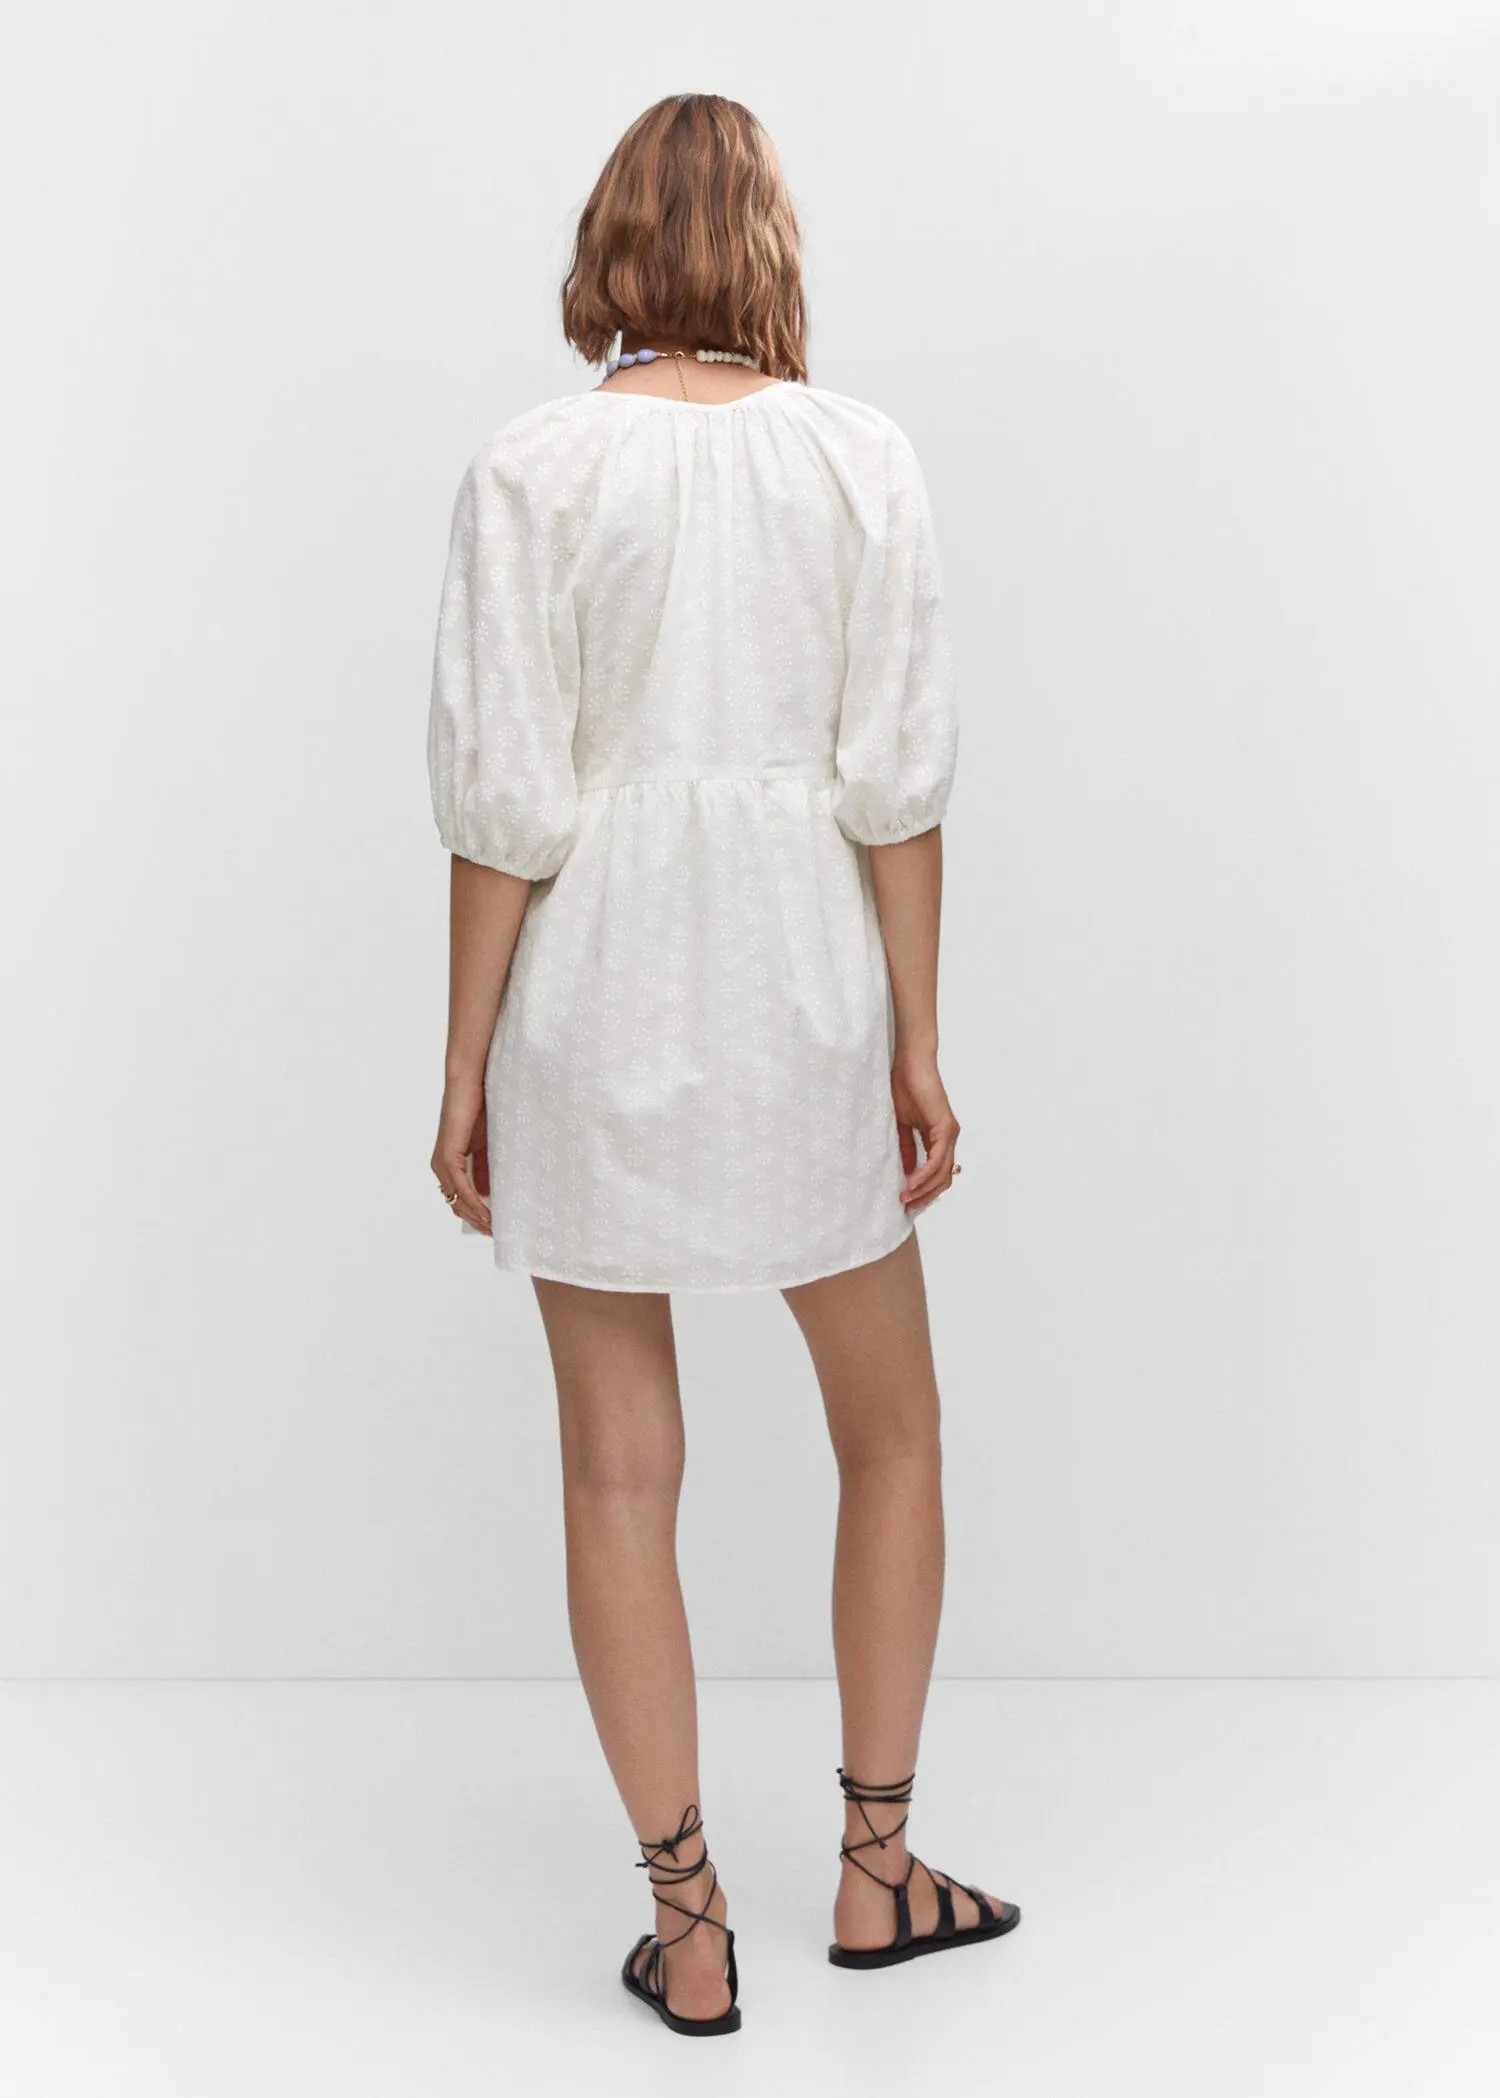 Mango Puff-sleeved embroidered dress. a person wearing a white dress standing in a room. 